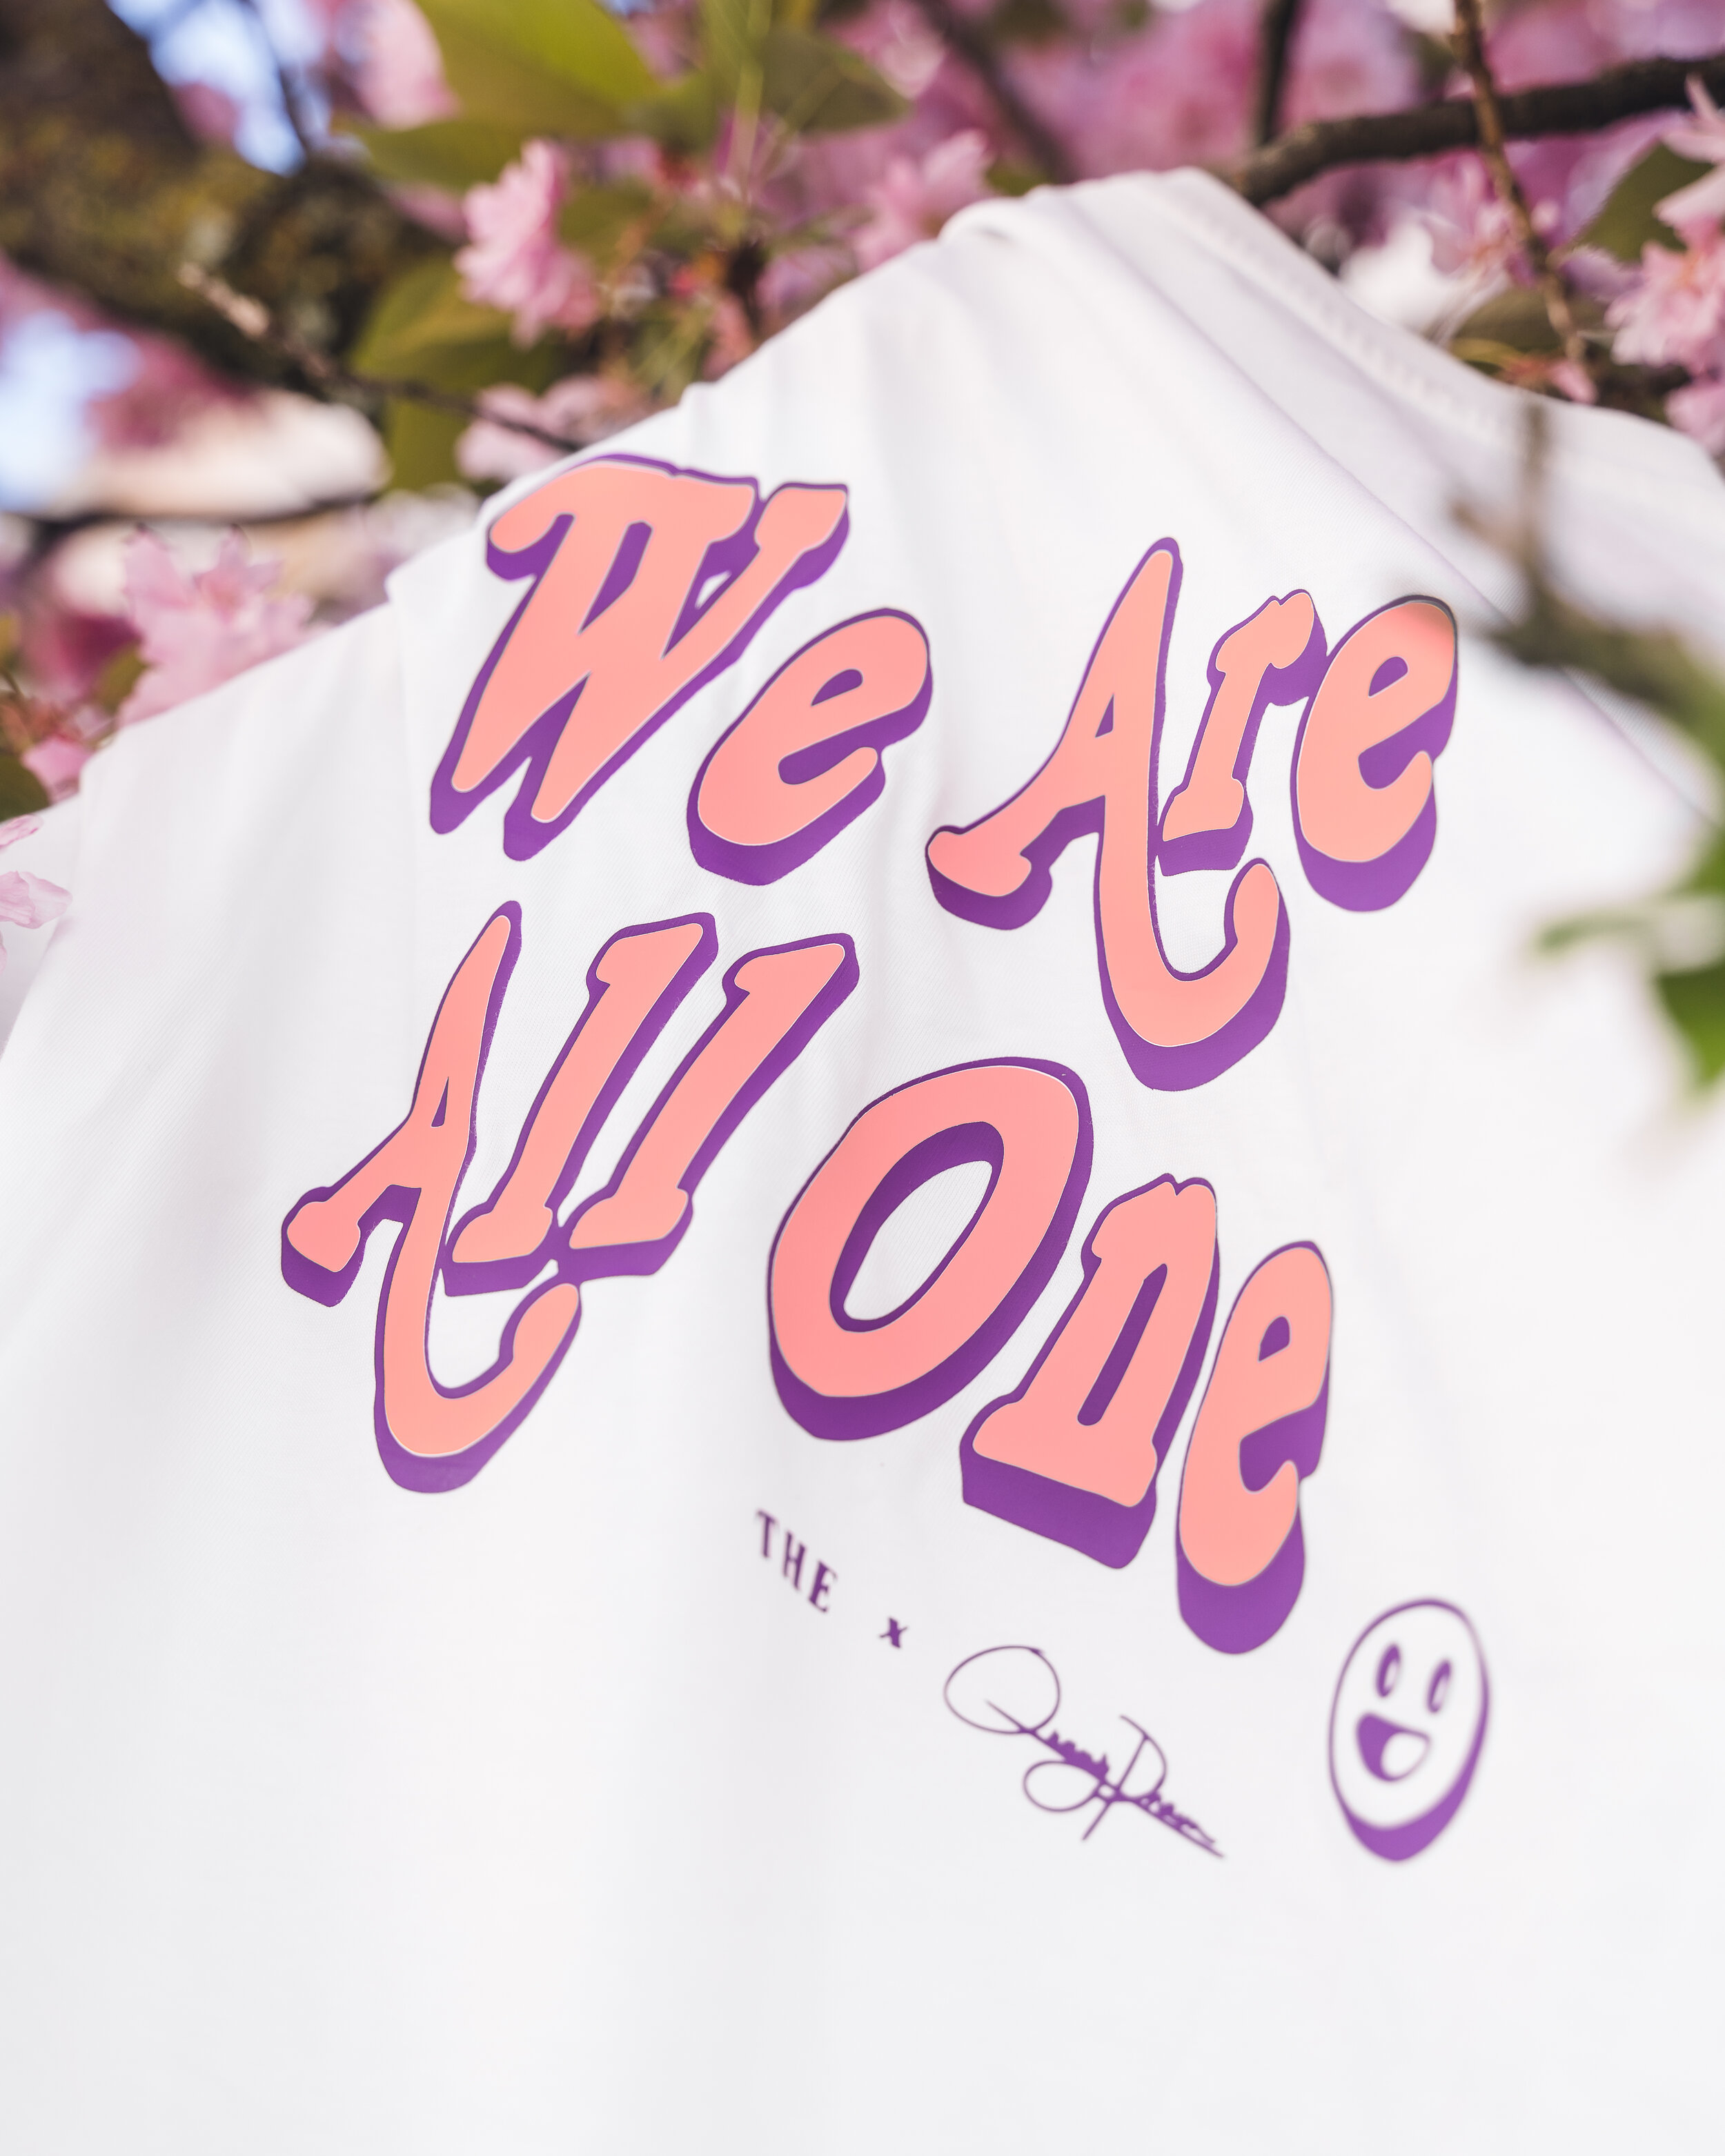 We Are All One shirt-5275-ig.jpg